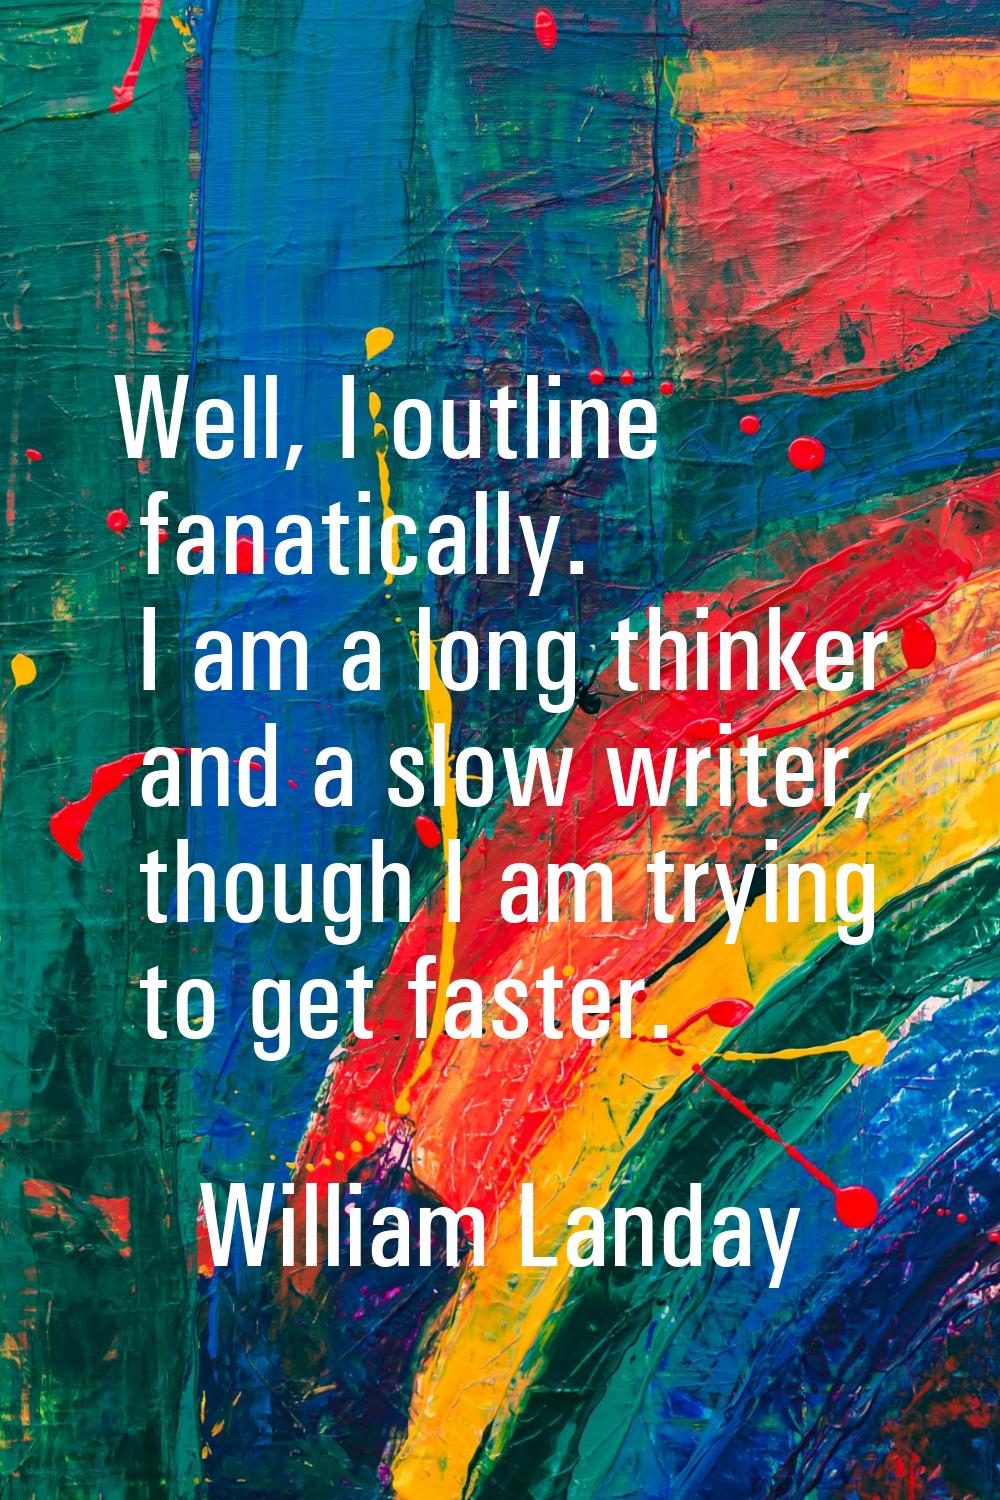 Well, I outline fanatically. I am a long thinker and a slow writer, though I am trying to get faste